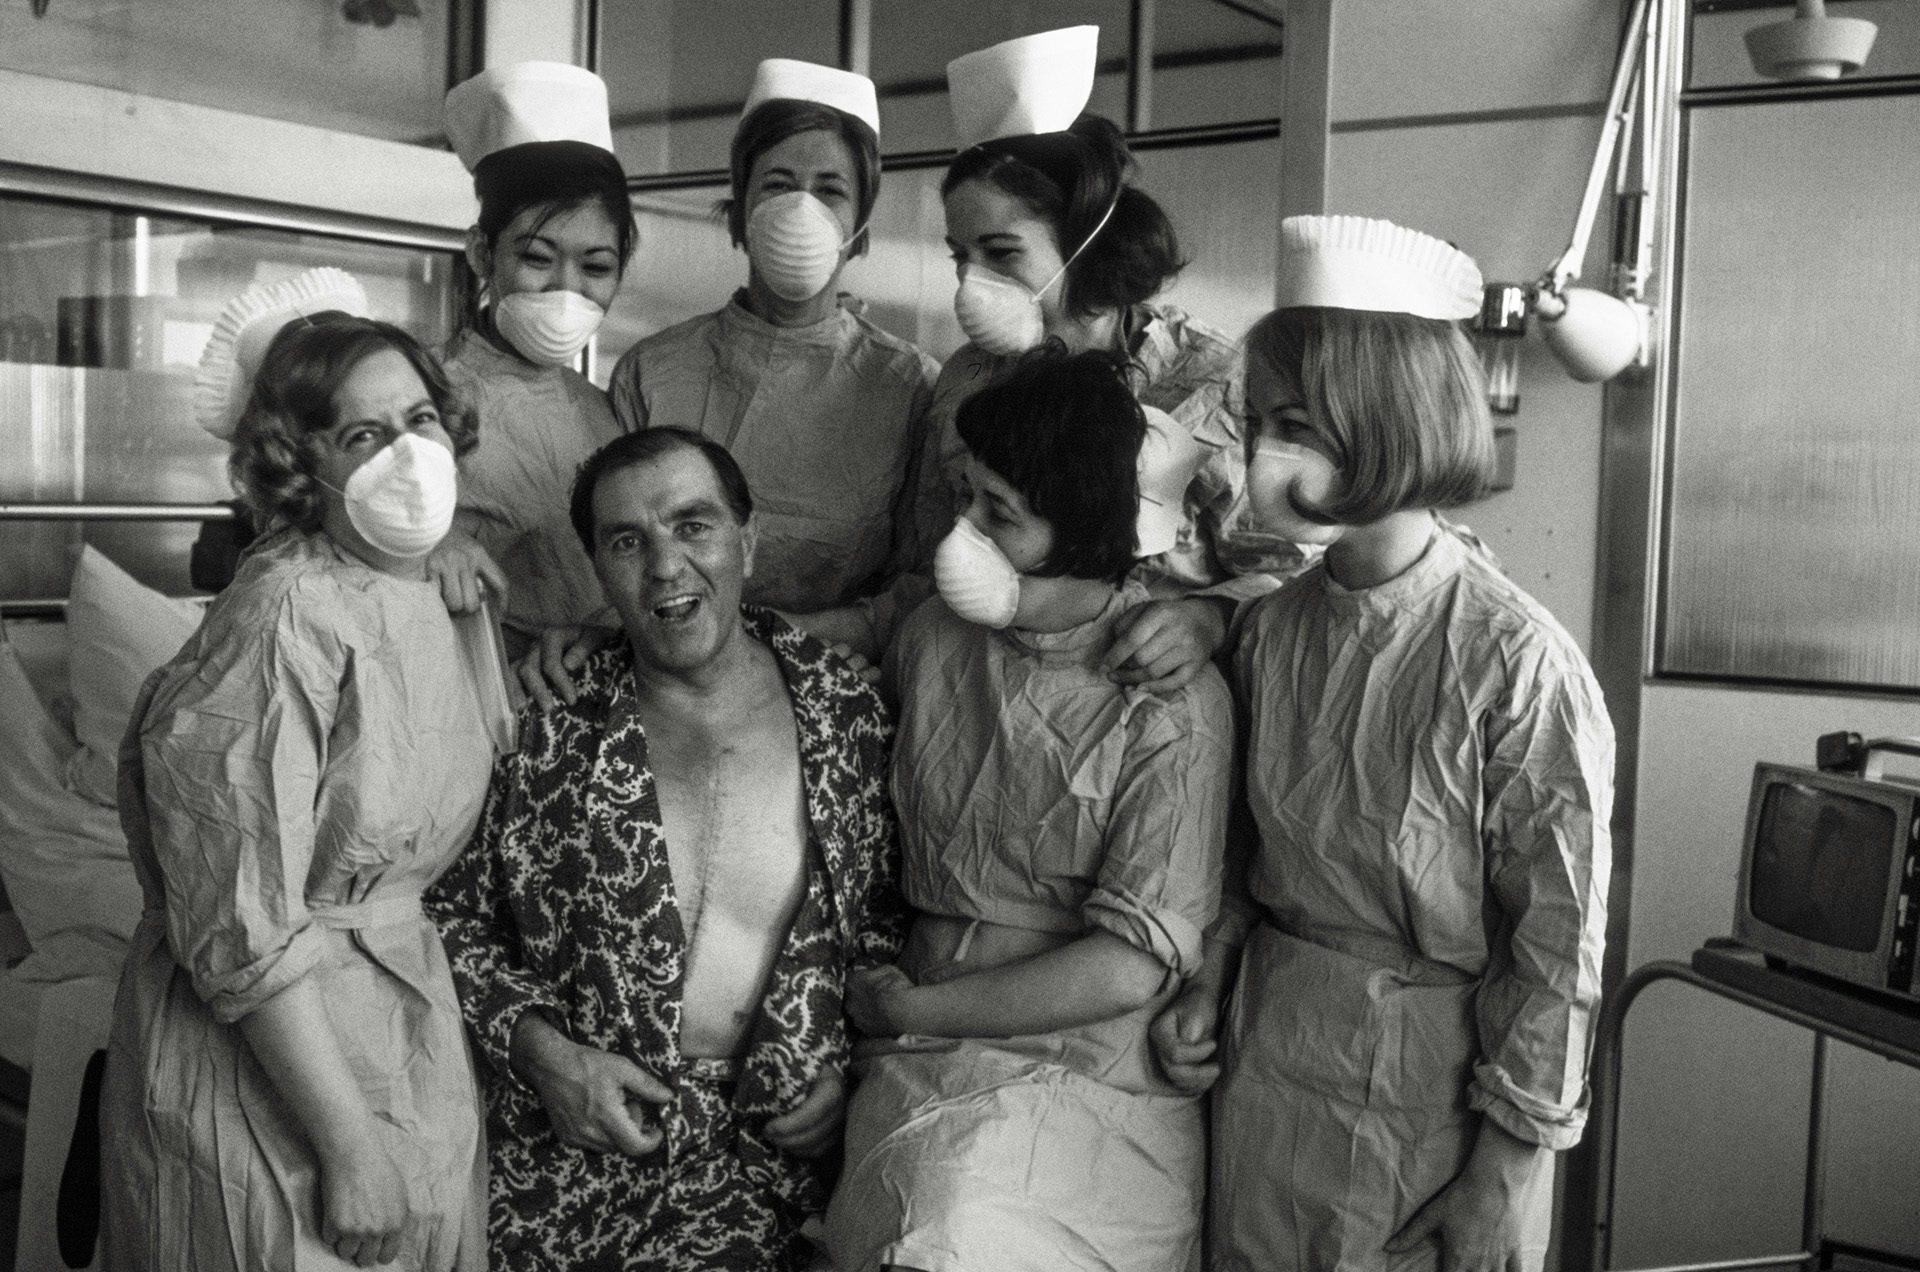 Black and white photograph of a group of NHS nurses smiling with a masked patient who is wearing a patterned robe